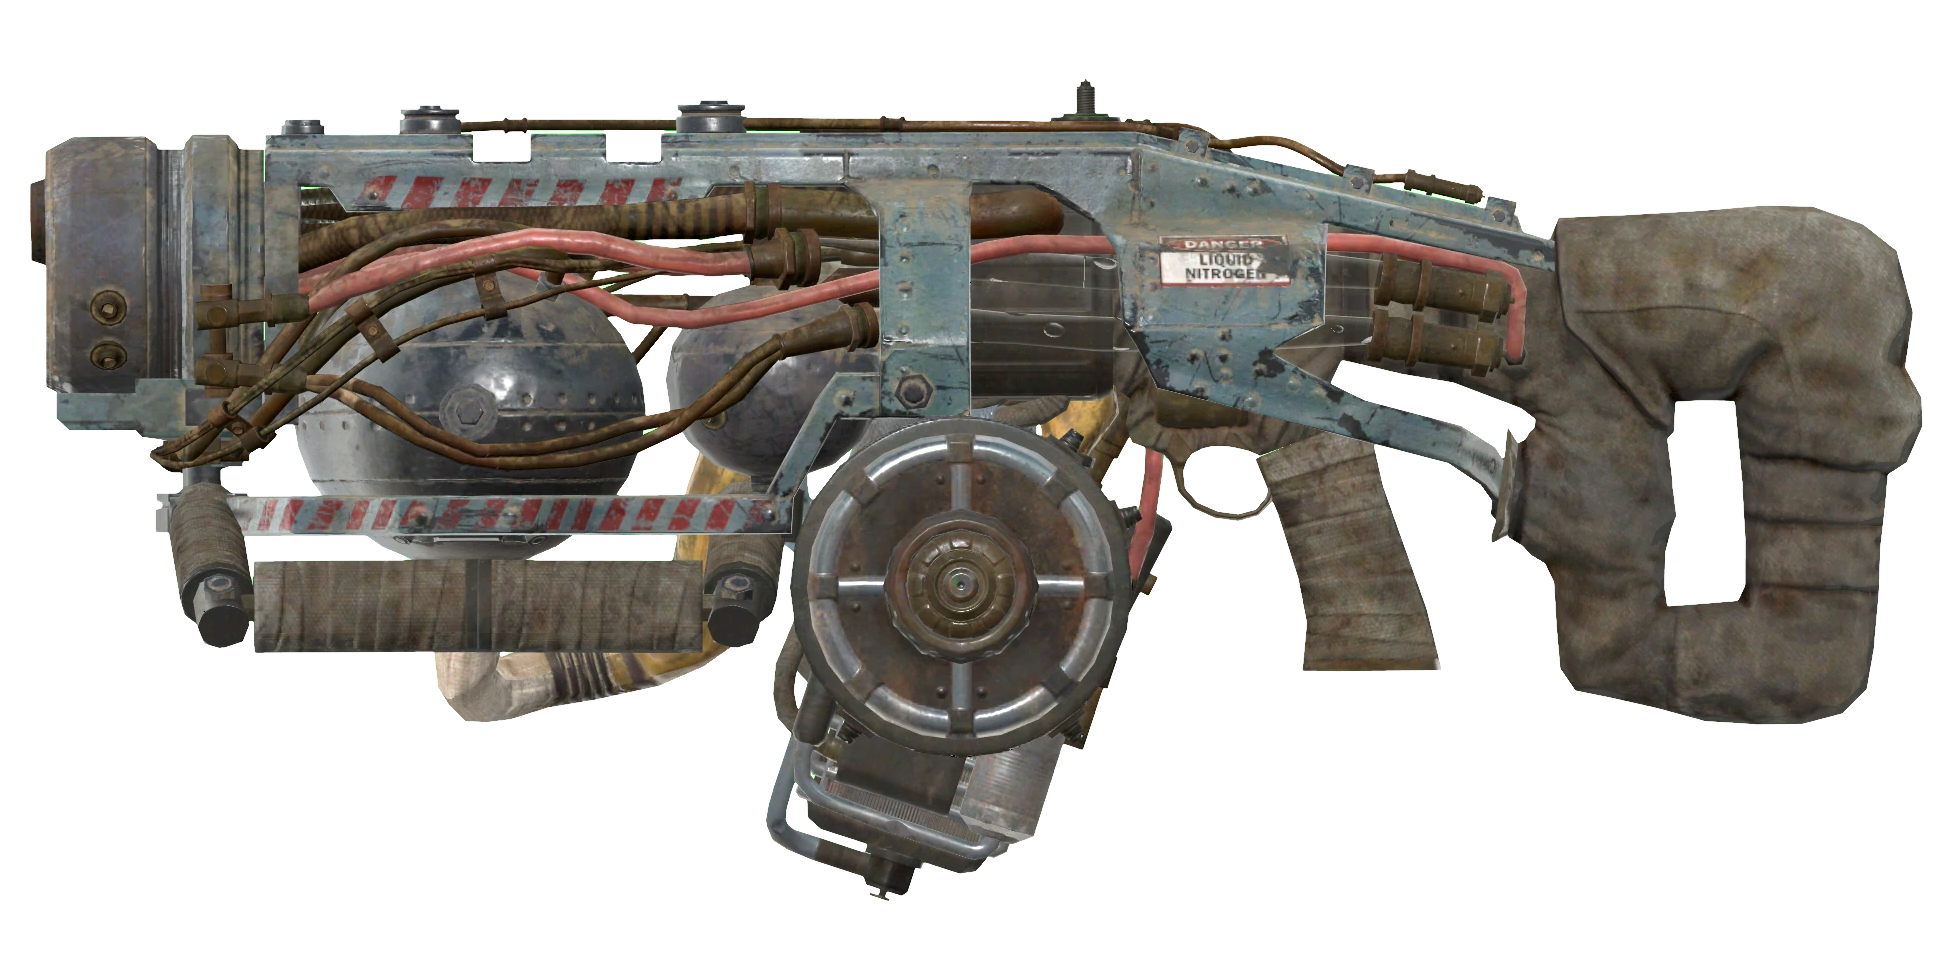 Fallout 4 weapons from fallout 76 фото 68